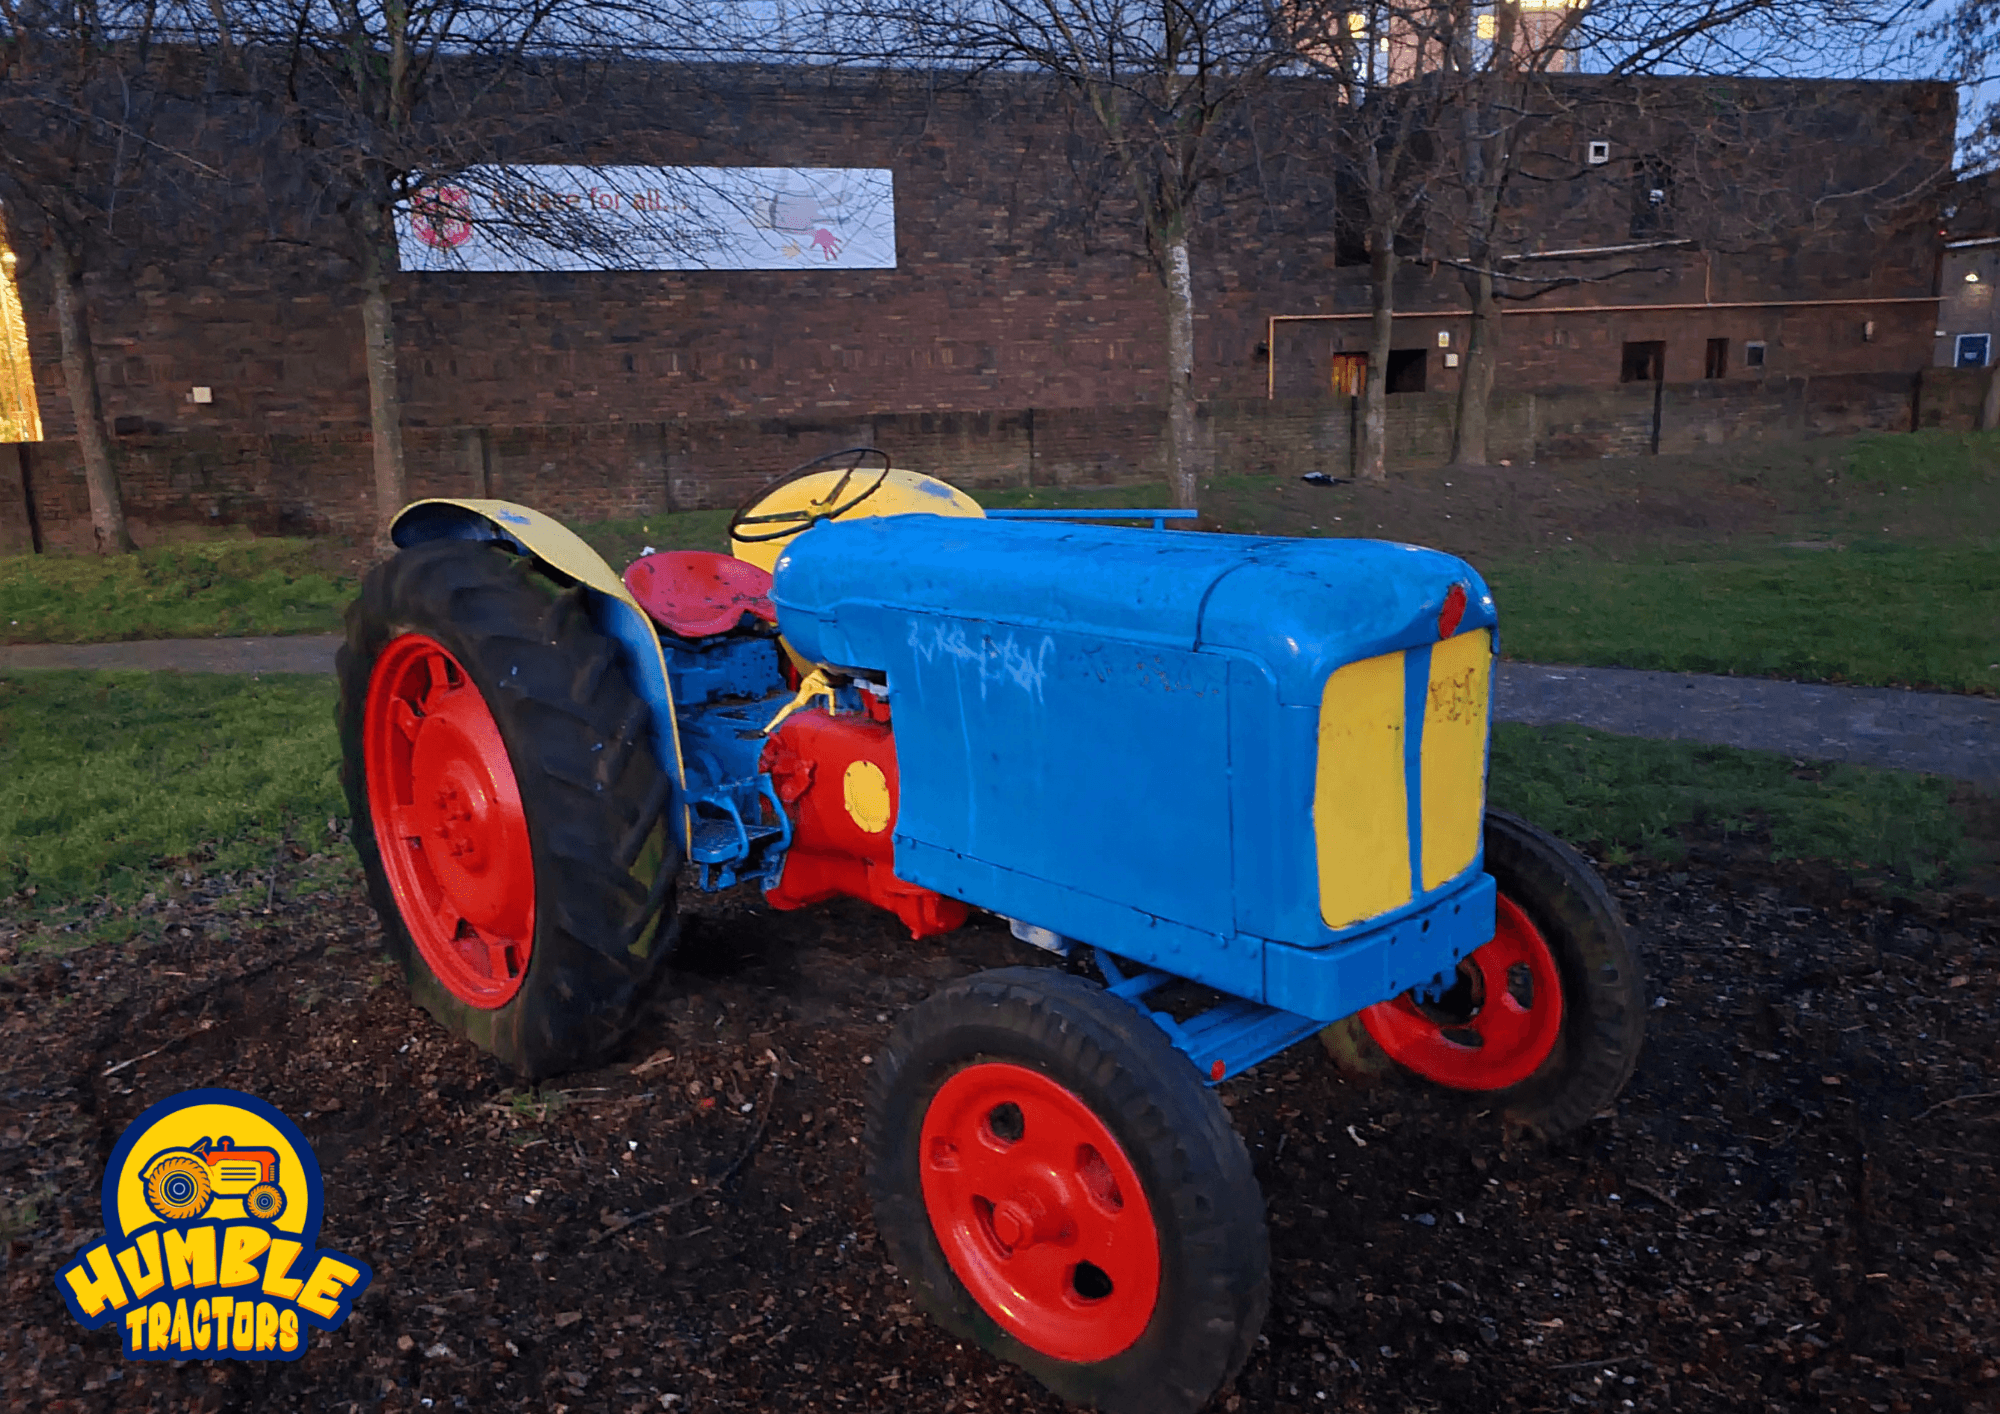 Humble Tractor #26